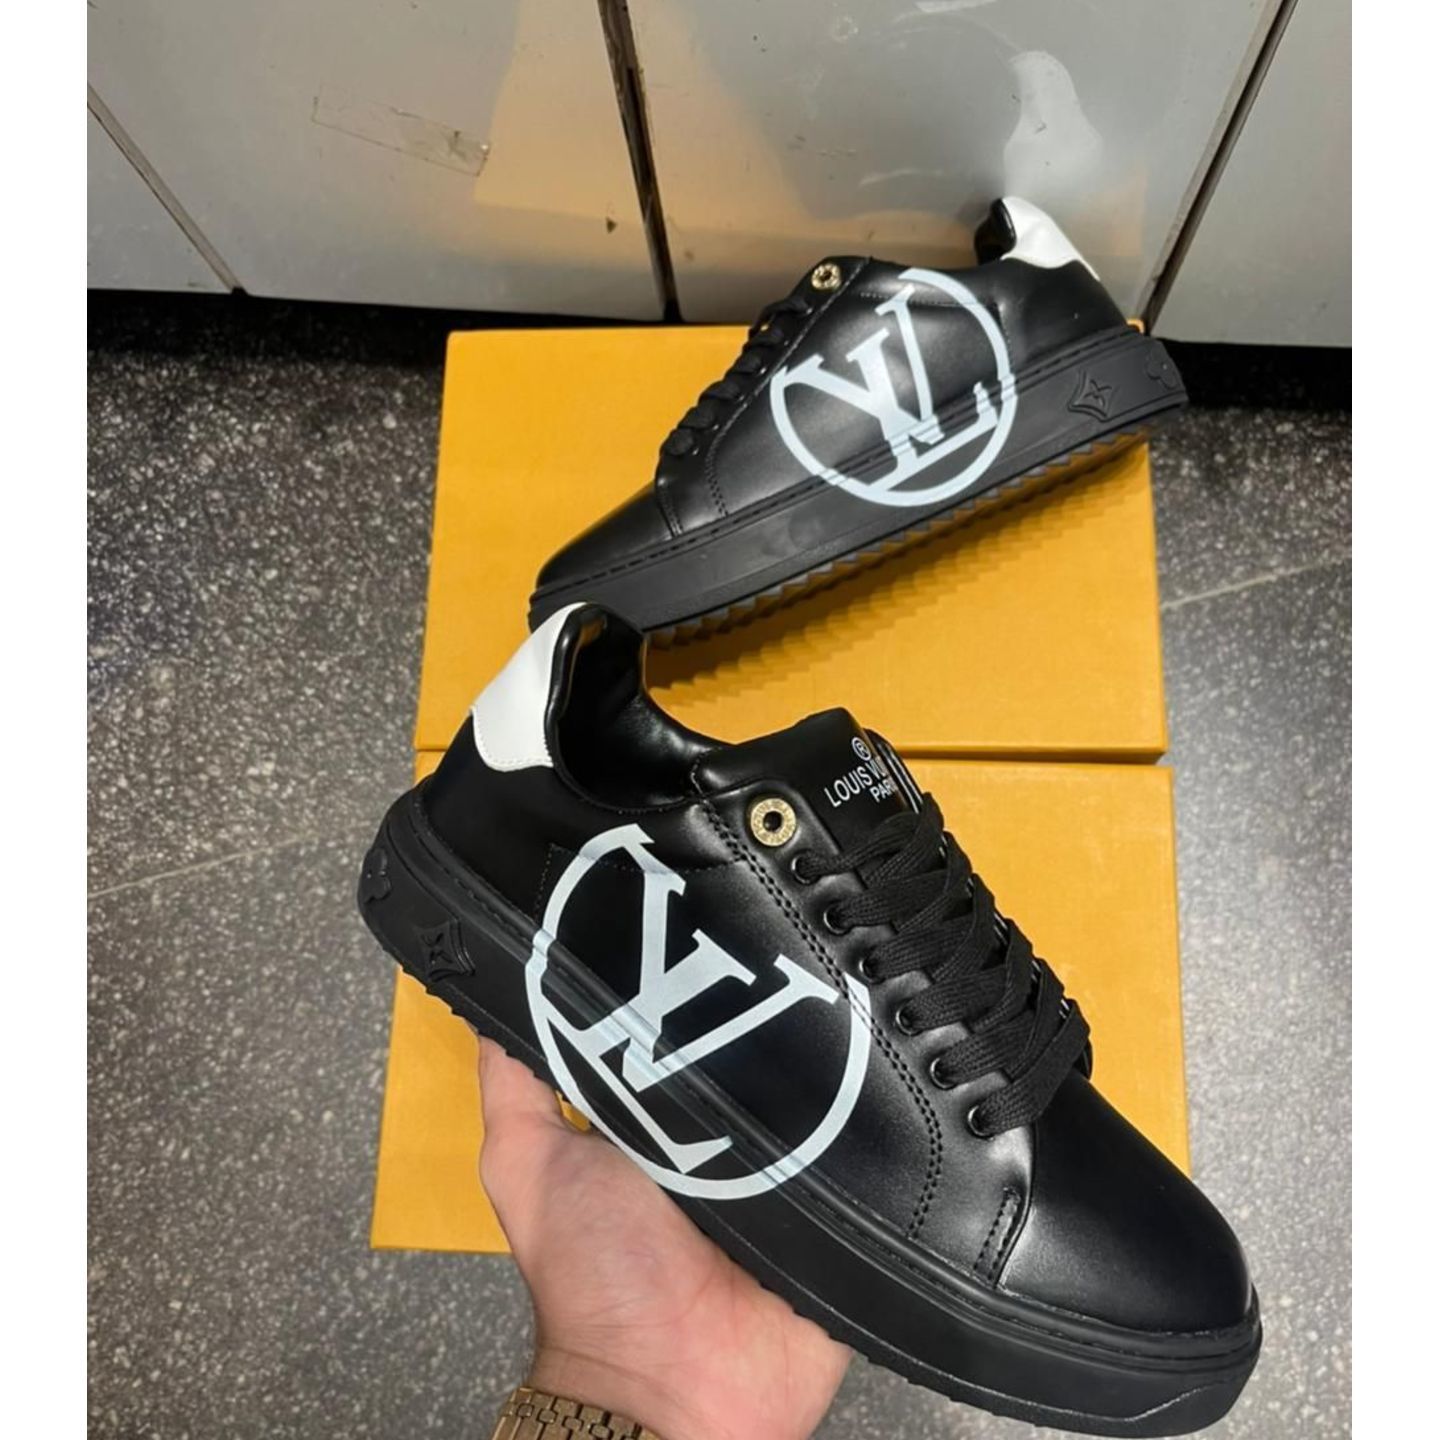 Insta Shoppee Louis Vuitton Time Out First Copy Sneaker - White and Black